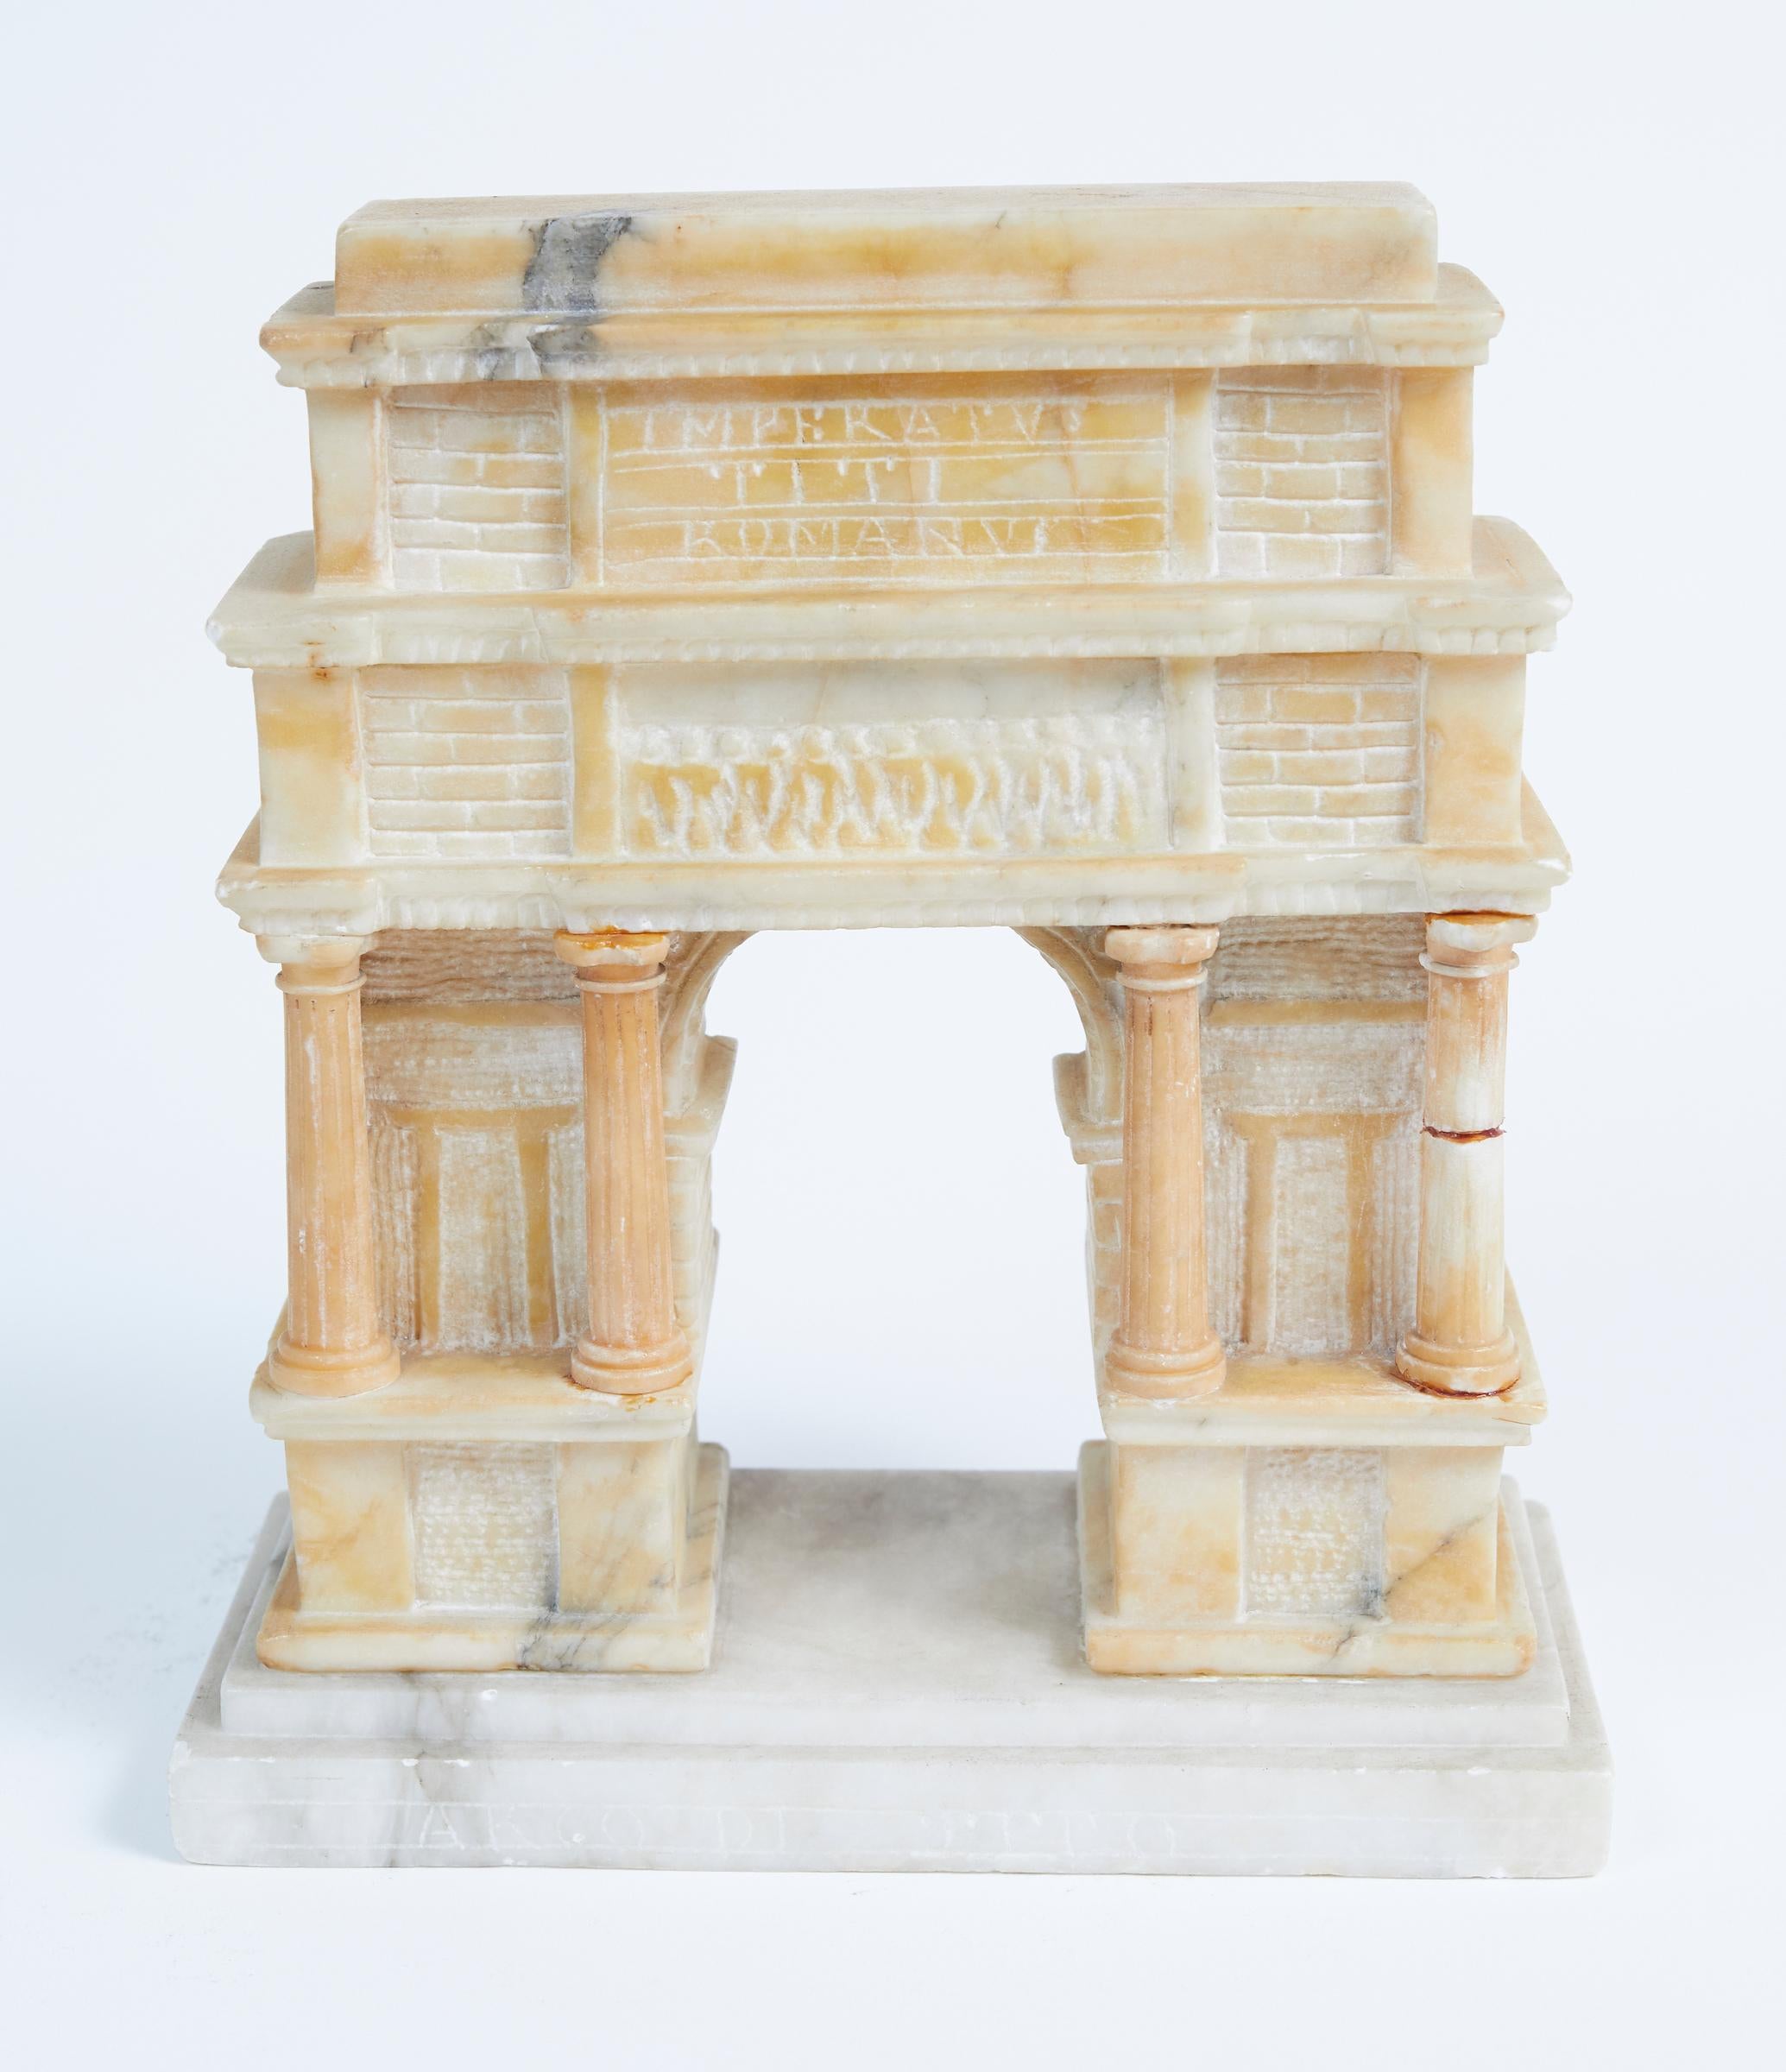 Late 19th Century 19th Century Carved Alabaster Grand Tour Model of Titus Arch in Rome